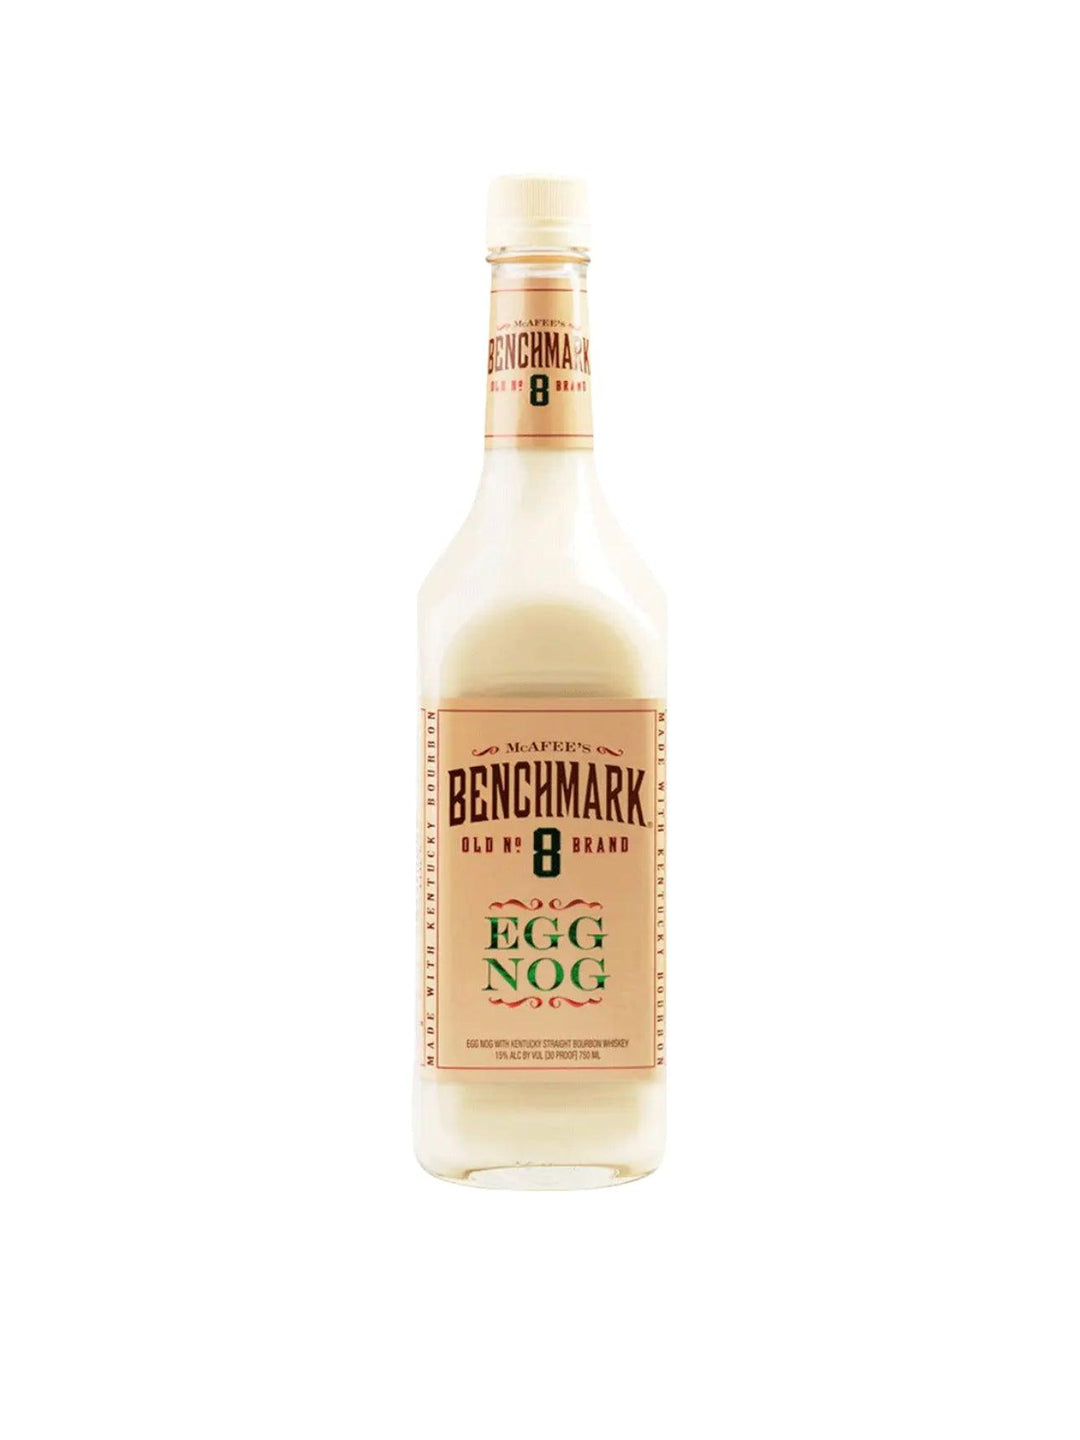 Benchmark Old No.8 Egg Nog With Kentucky Straight Bourbon Whiskey - Liquor Luxe